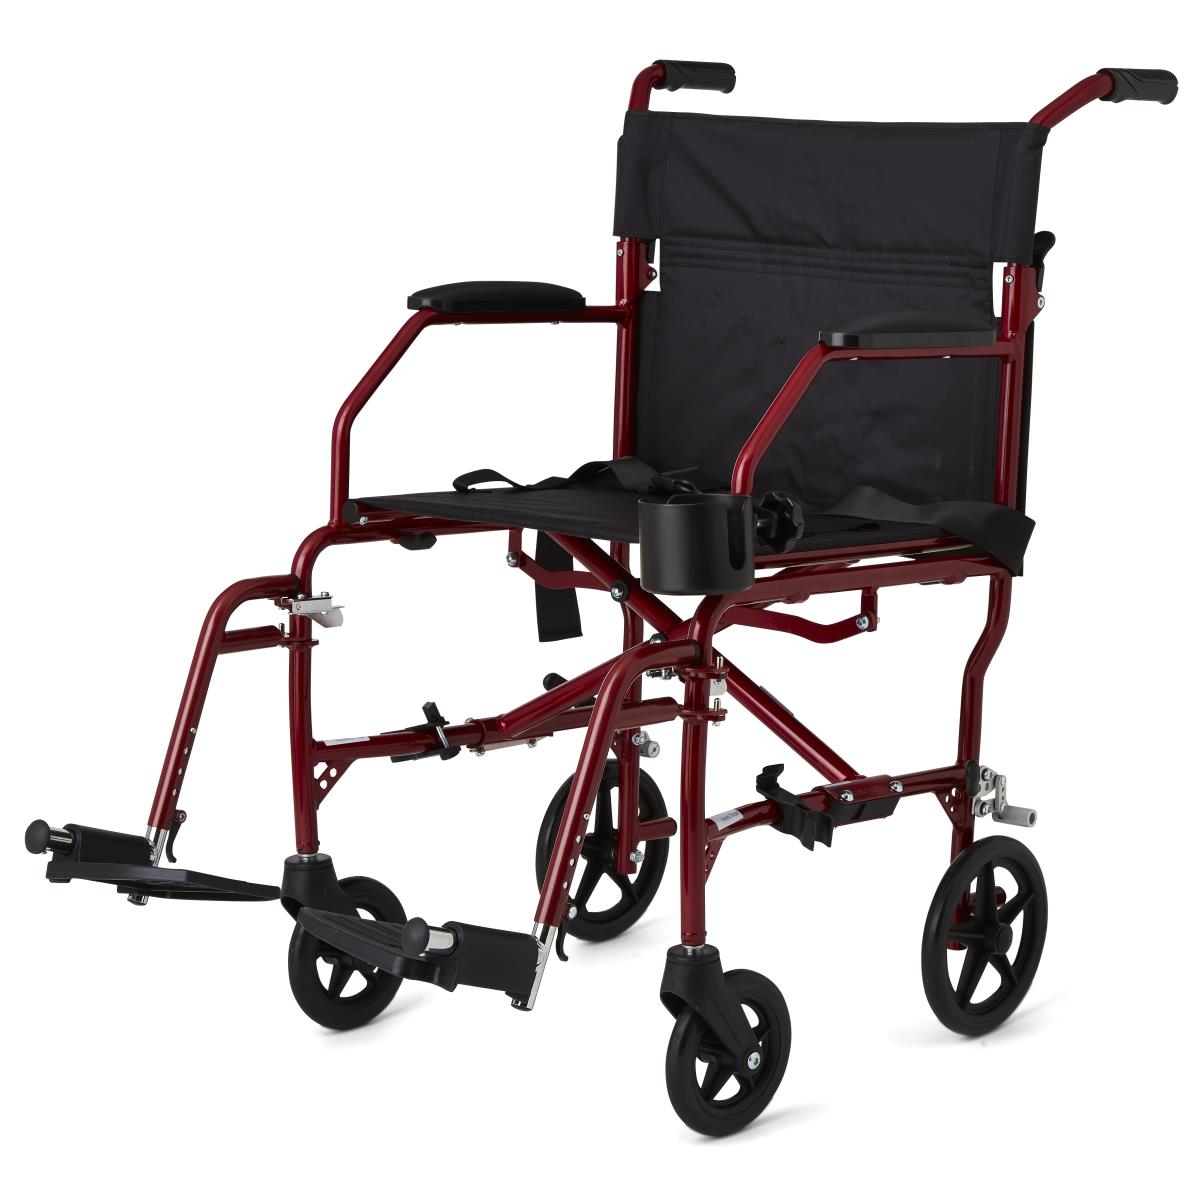 Medline Ultralight Transport Mobility Wheelchair, 19" Wide Seat, Permanent Desk-Length Arms, Swing Away Footrests